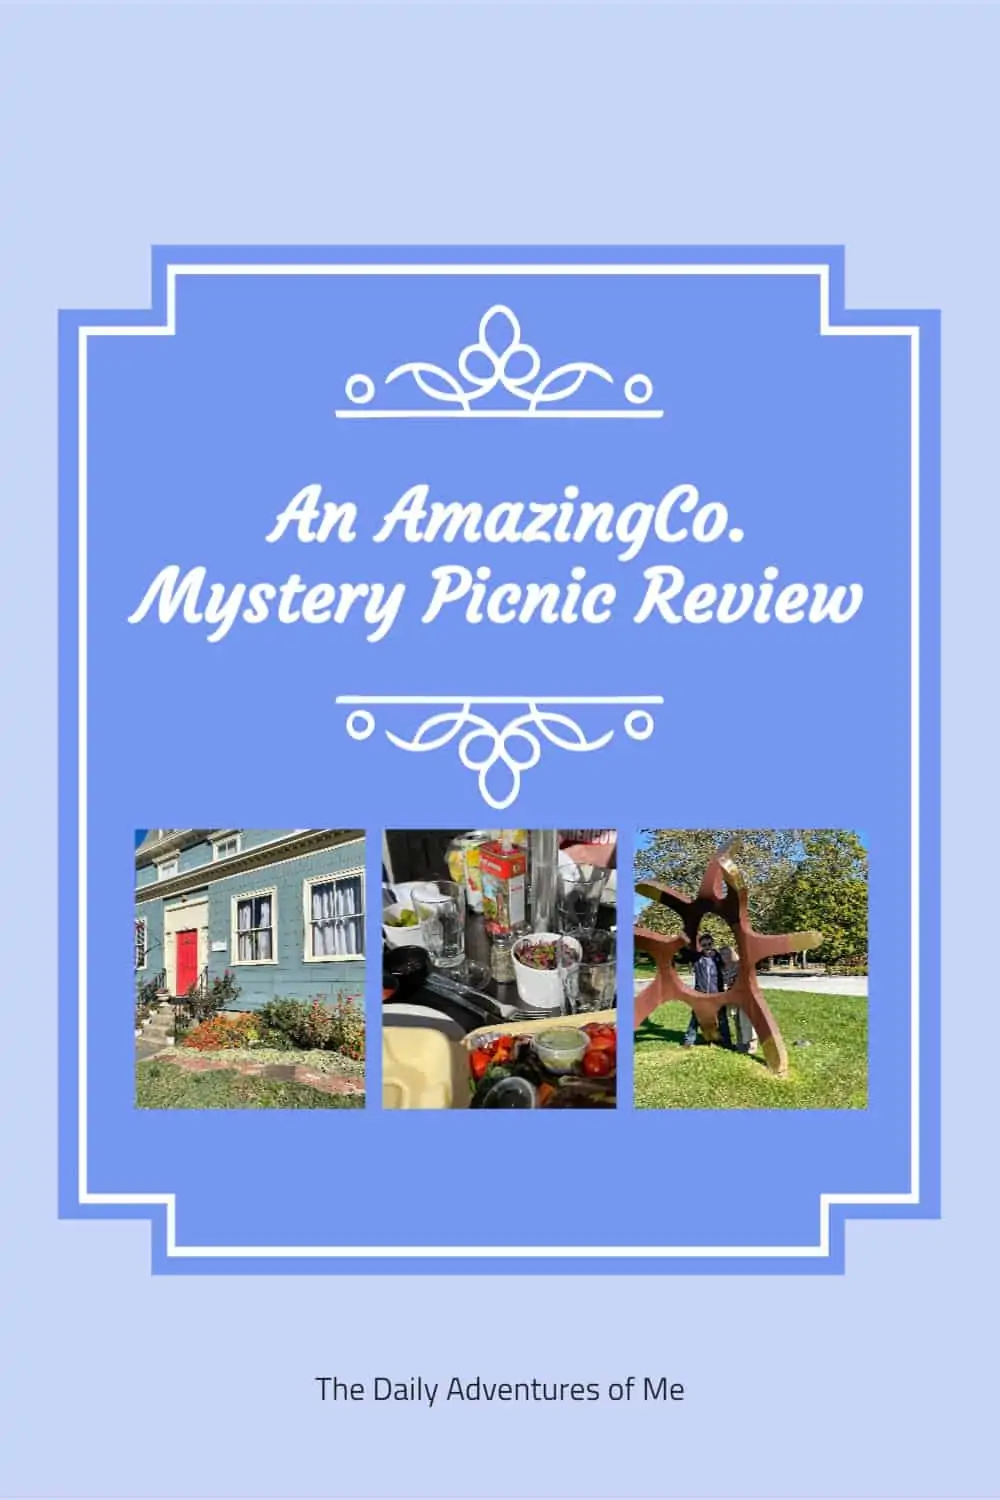 Are you looking for a fun outing? Consider a scavenger hunt-style picnic, available in over 50 cities. #familyactivities #hosted #datetime @amazing_co